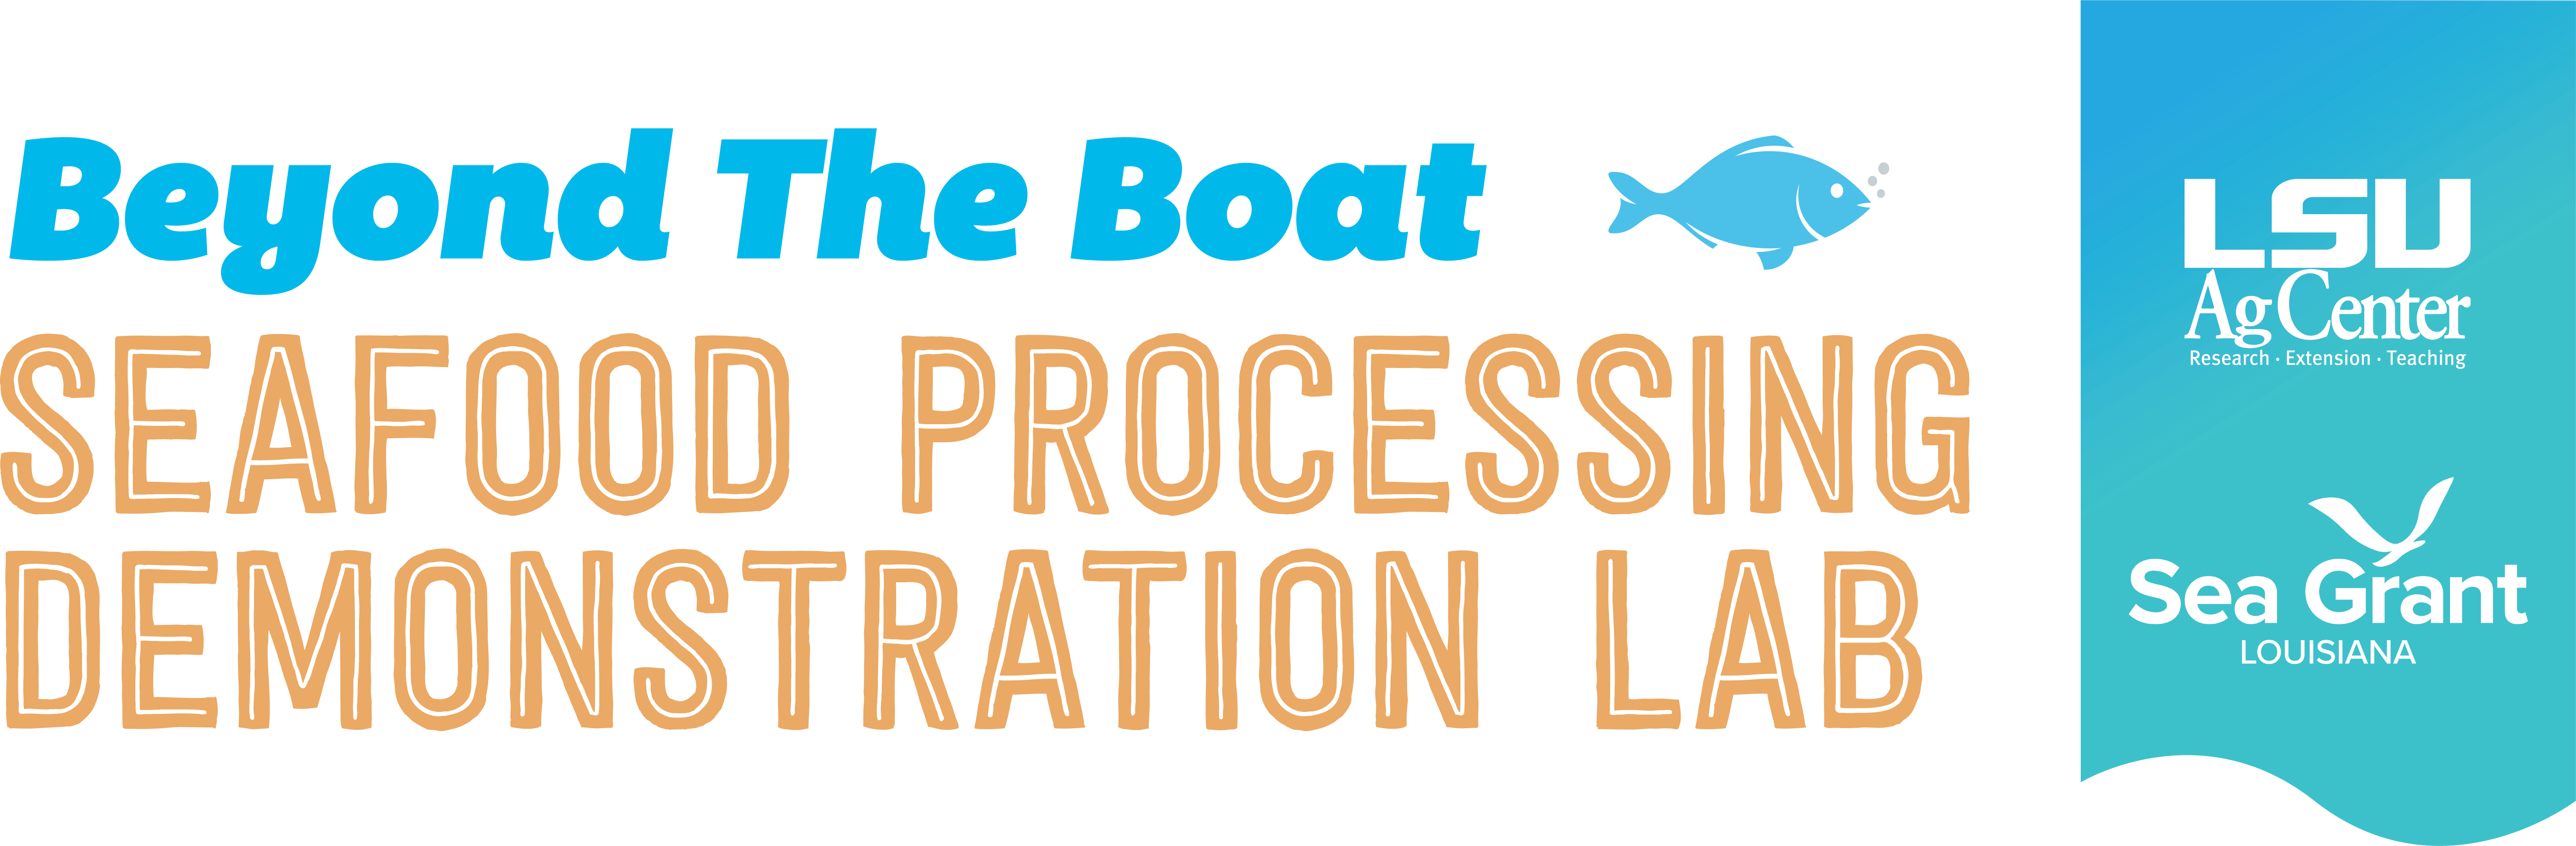 Beyond the boat seafood processing demonstration lab graphic